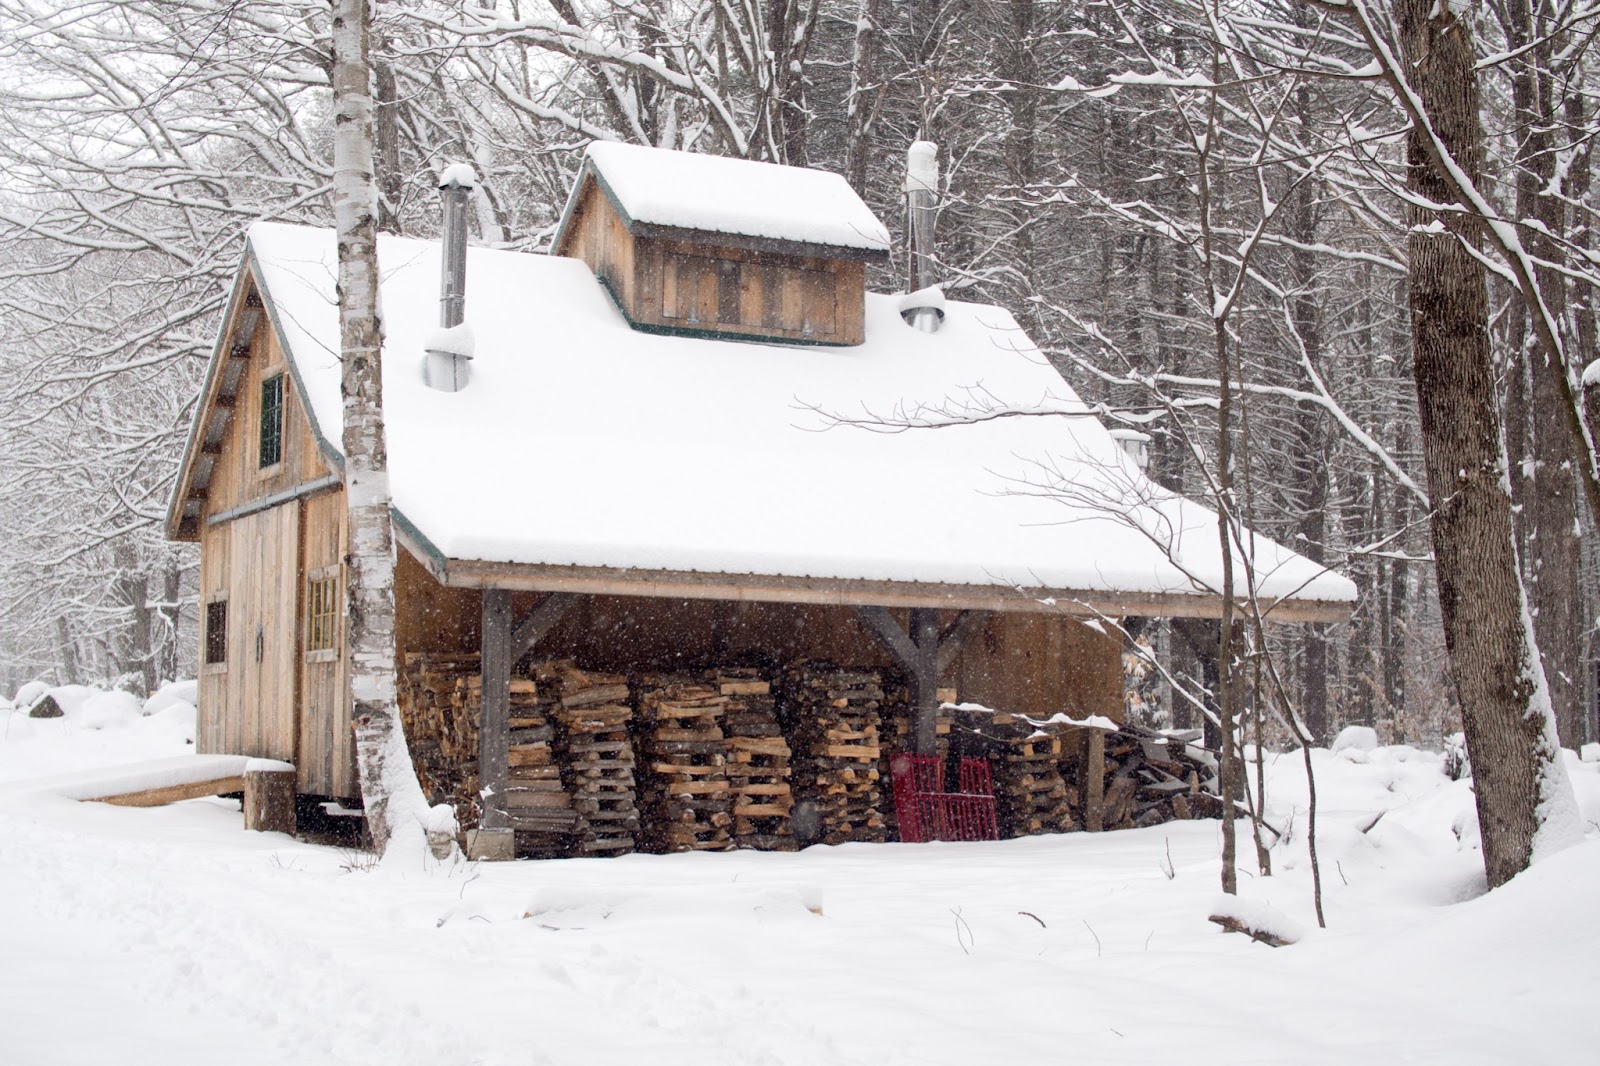 A rustic cabin covered in snow